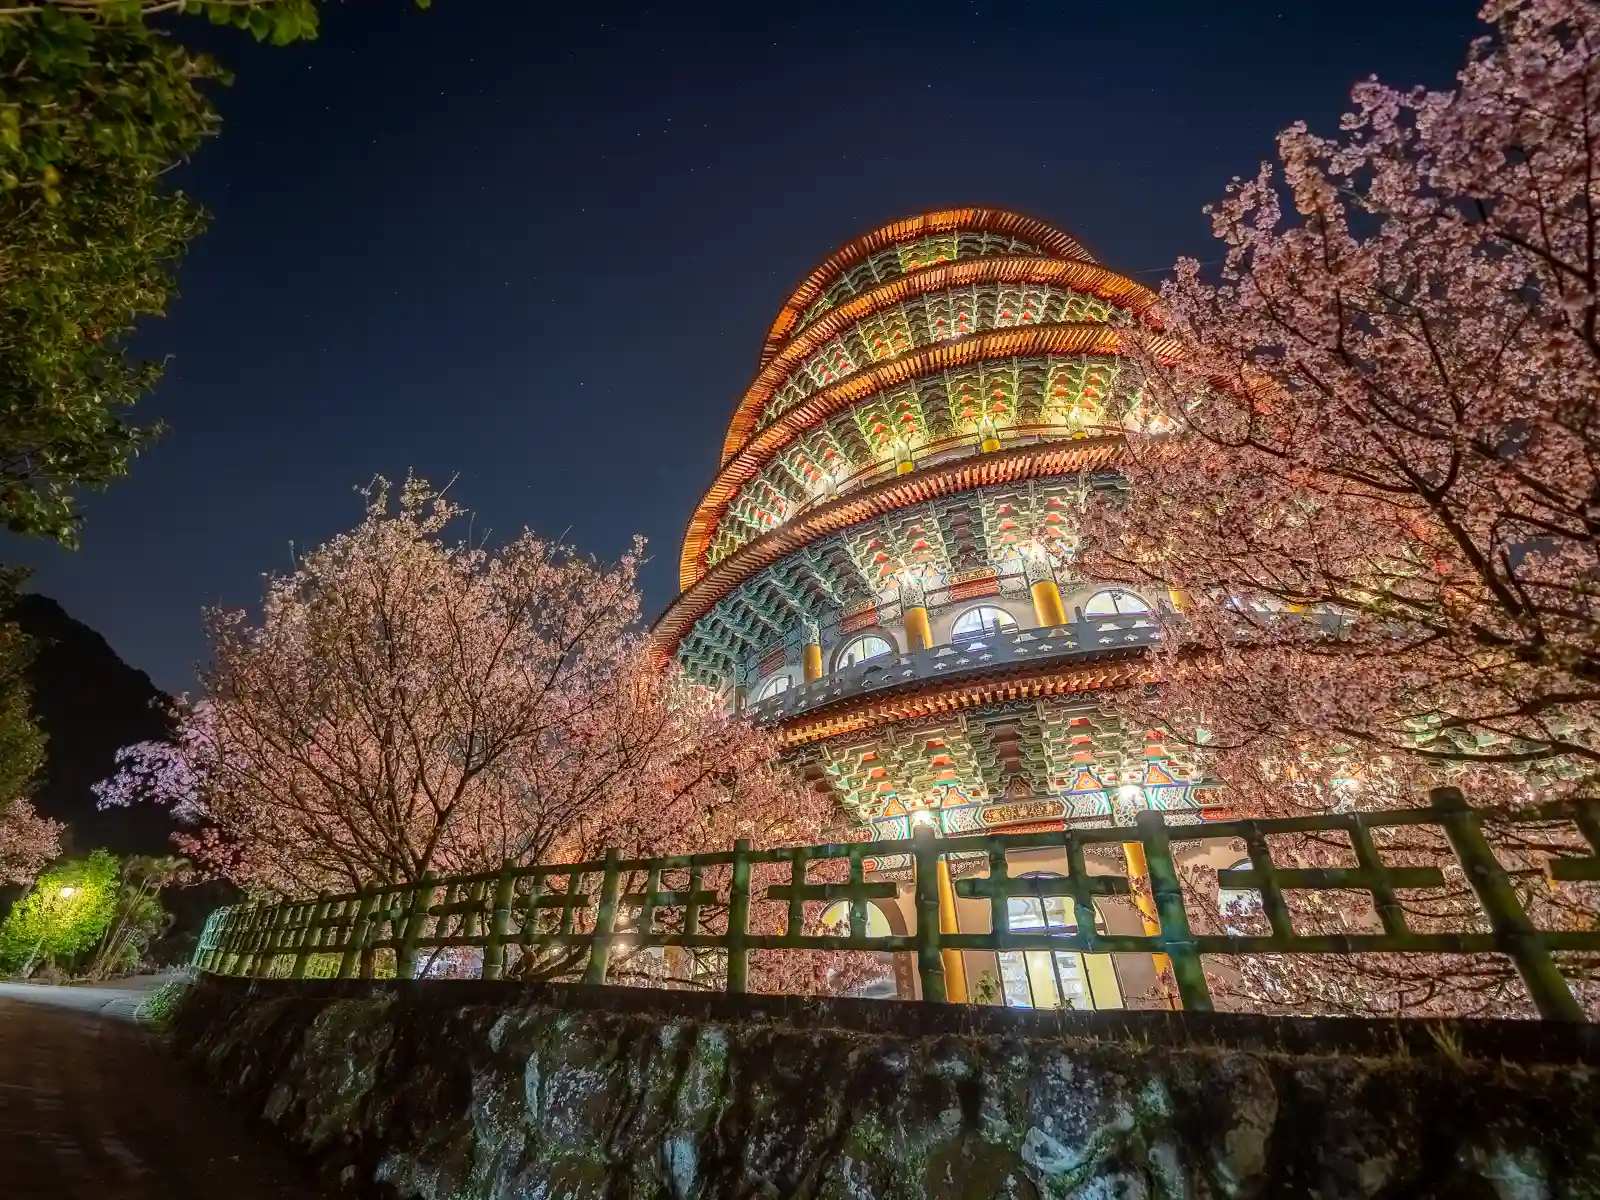 Cherry trees with their blossoms illuminated at night by the lights from the temple.